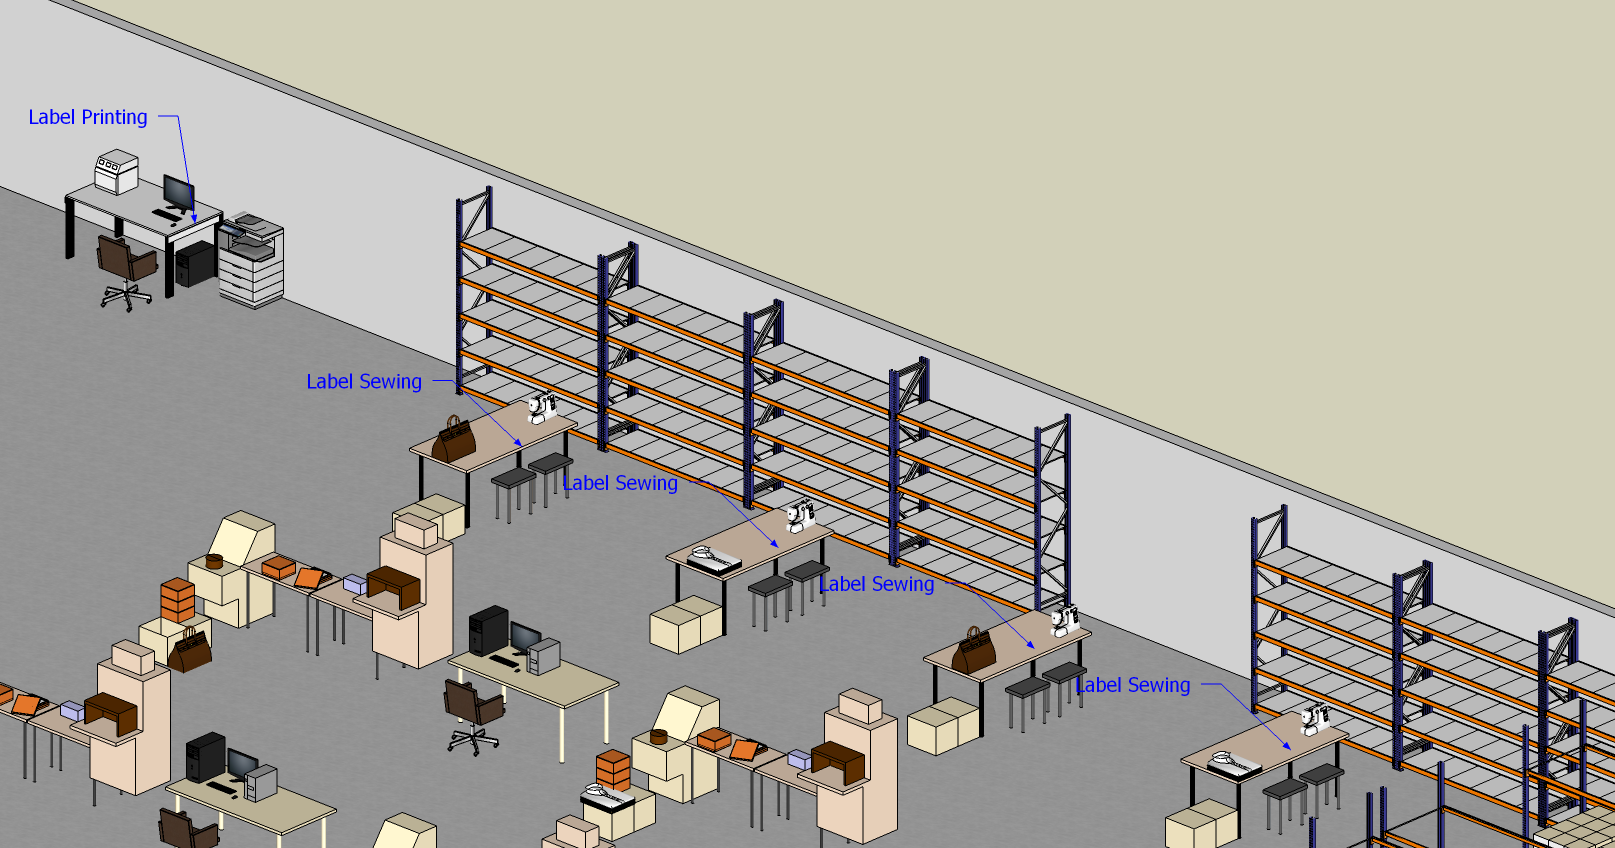 Step 3: 4 workstations where operators perform label sewing